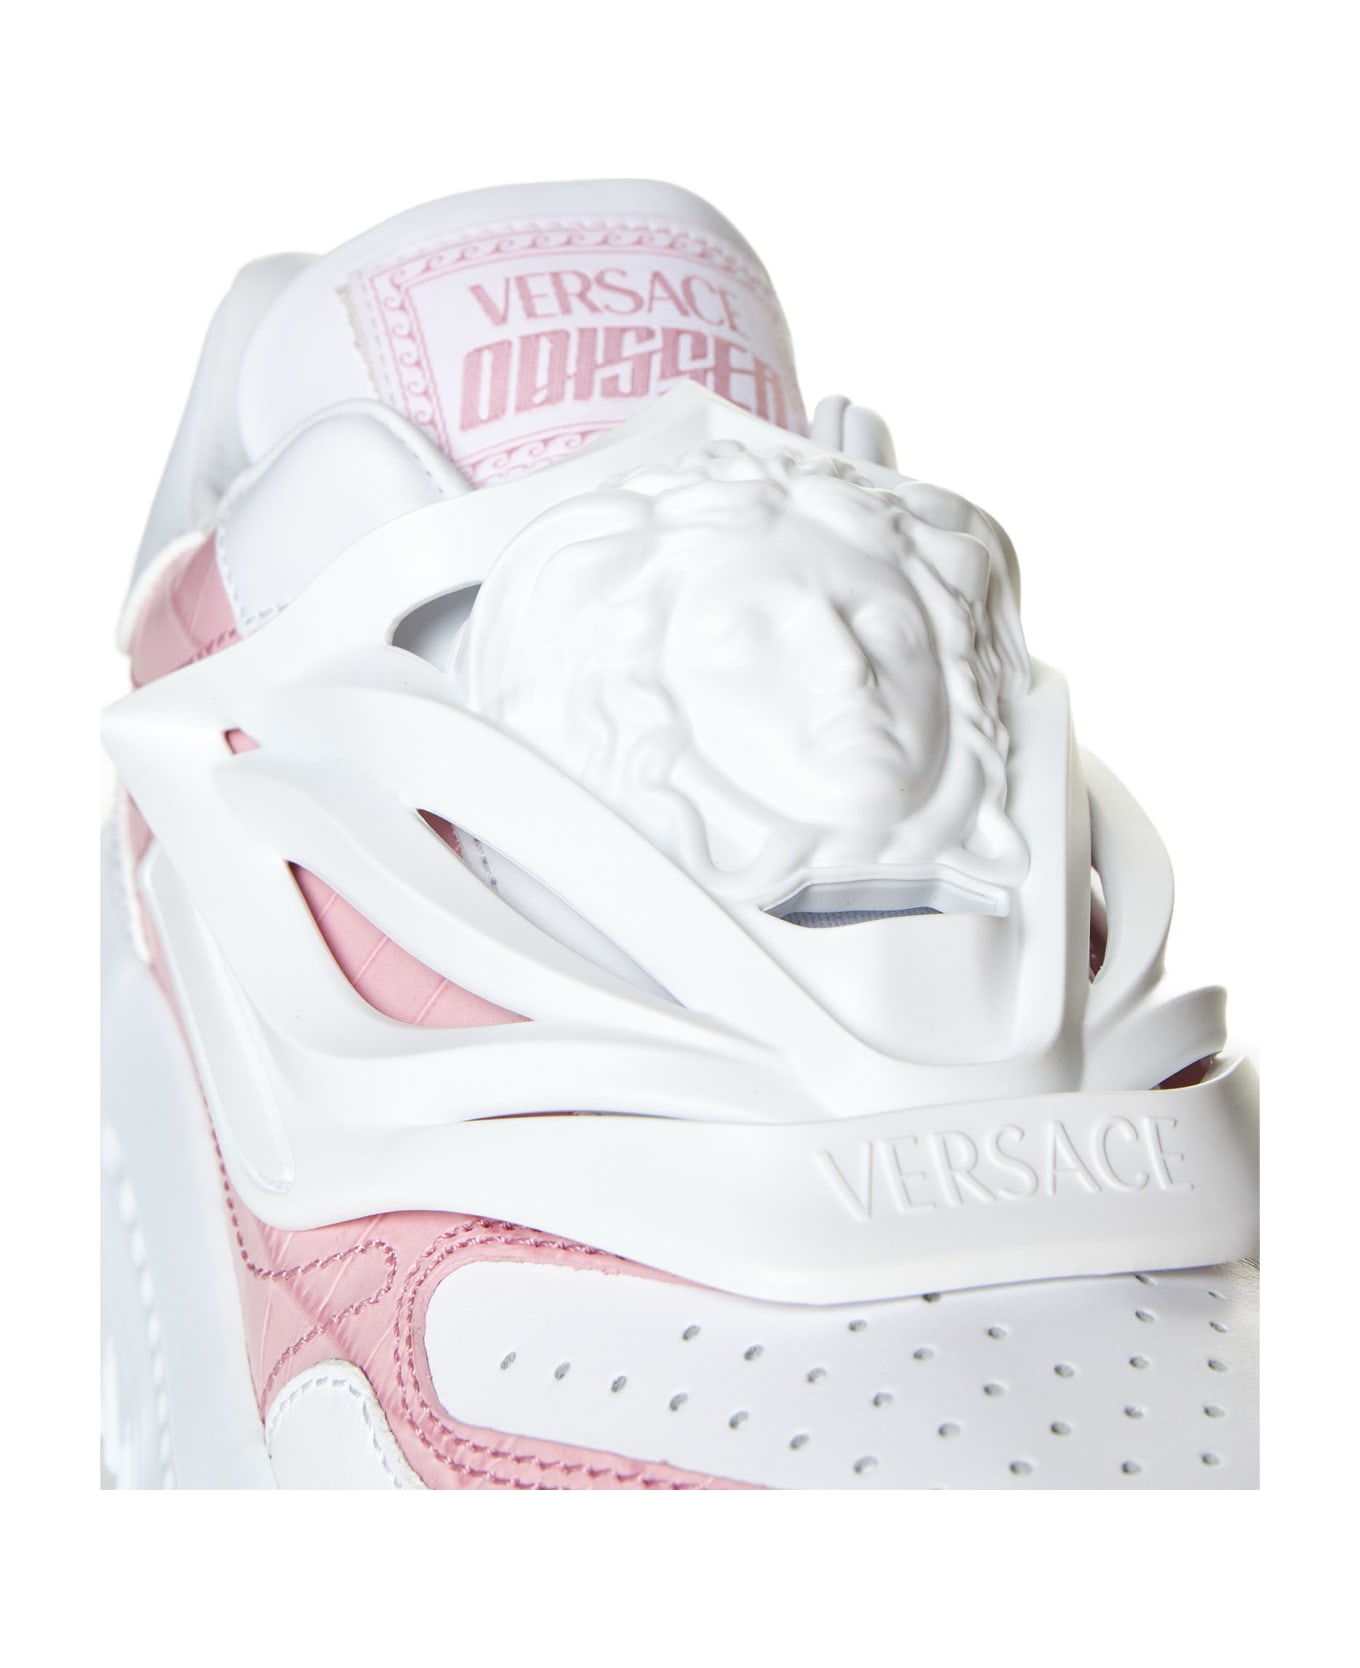 Versace 'odissea' Sneakers - White+english rose スニーカー